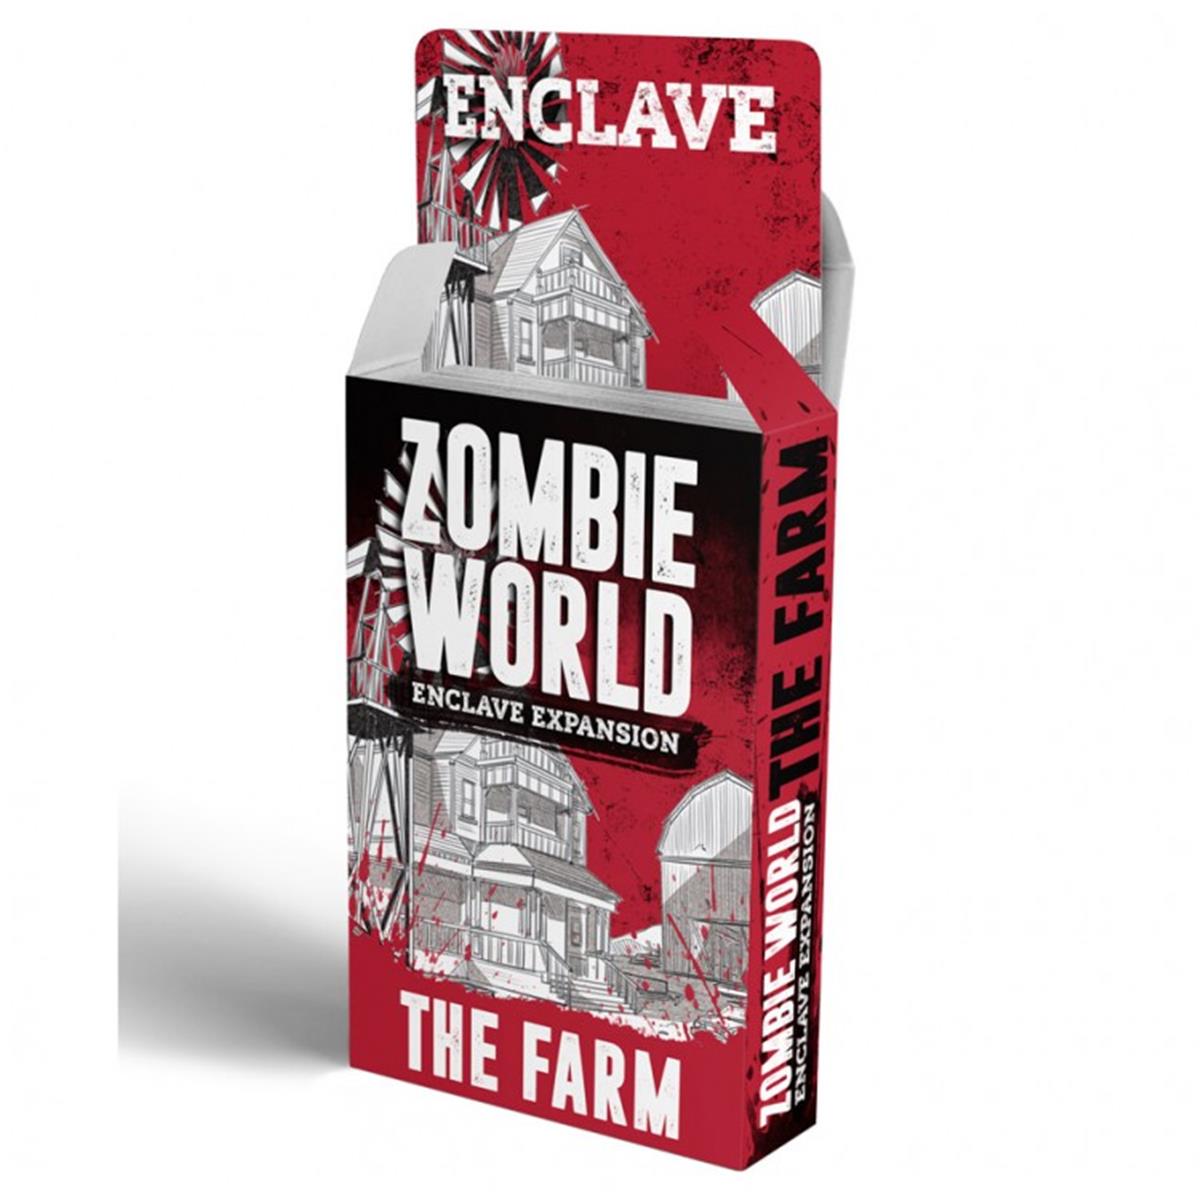 Maeb02 Zombie World The Farm Expansion Role Play Game